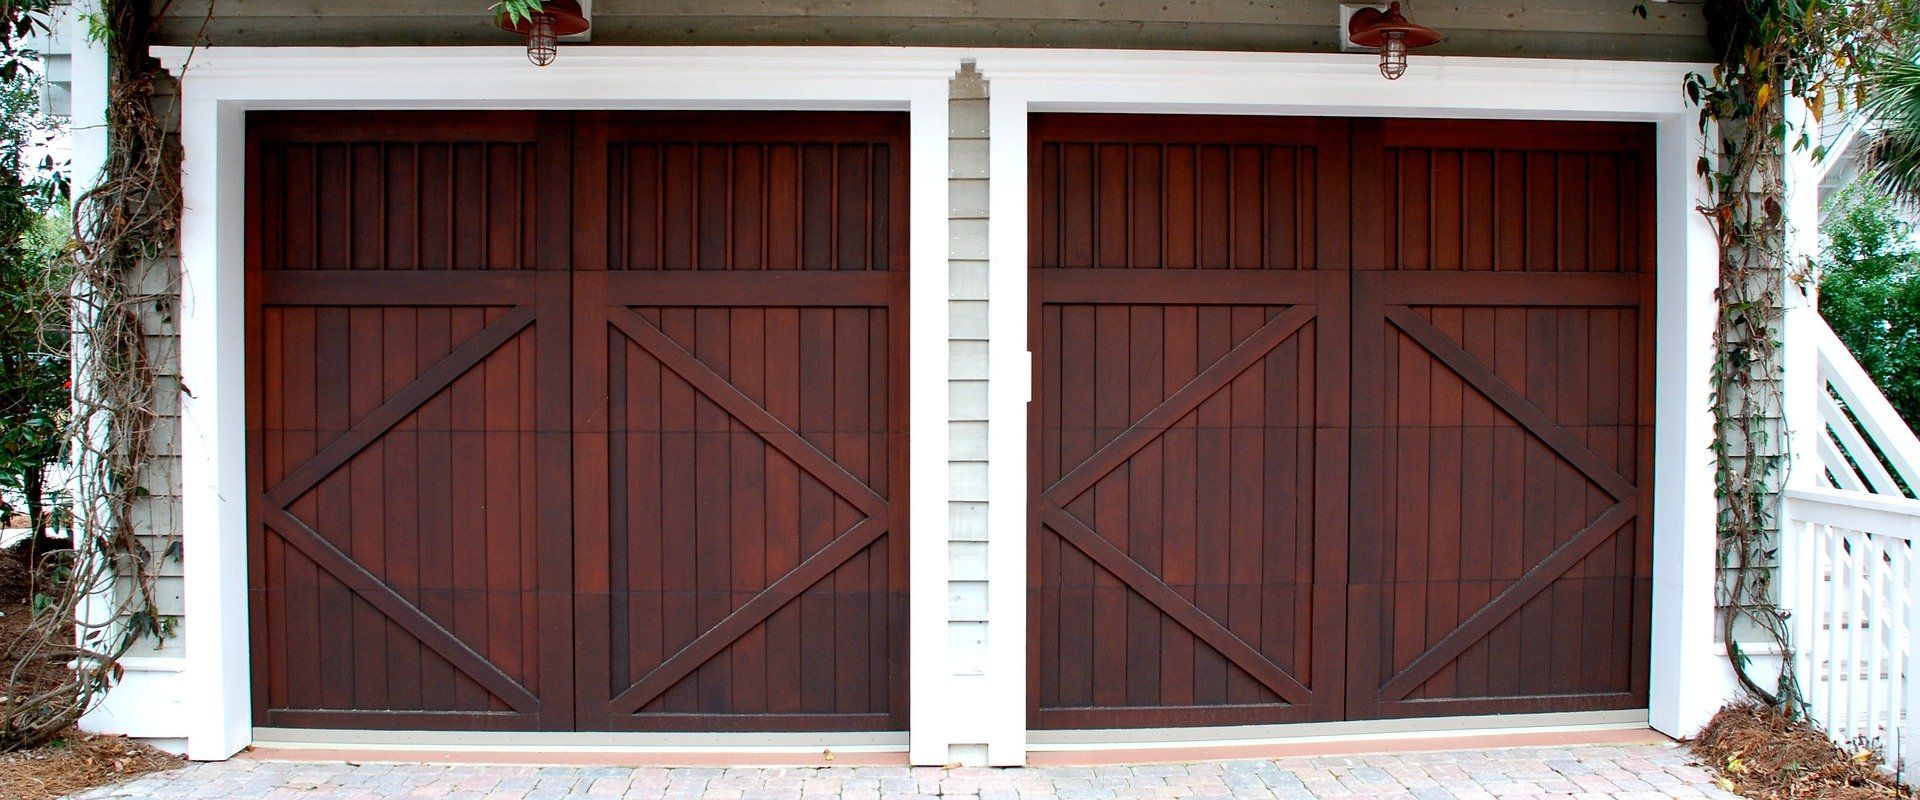 A Gorgeous Brown Set of Garage Doors, Which Glenn’s Garage Doors Can Build for Your Mid-MO Home.